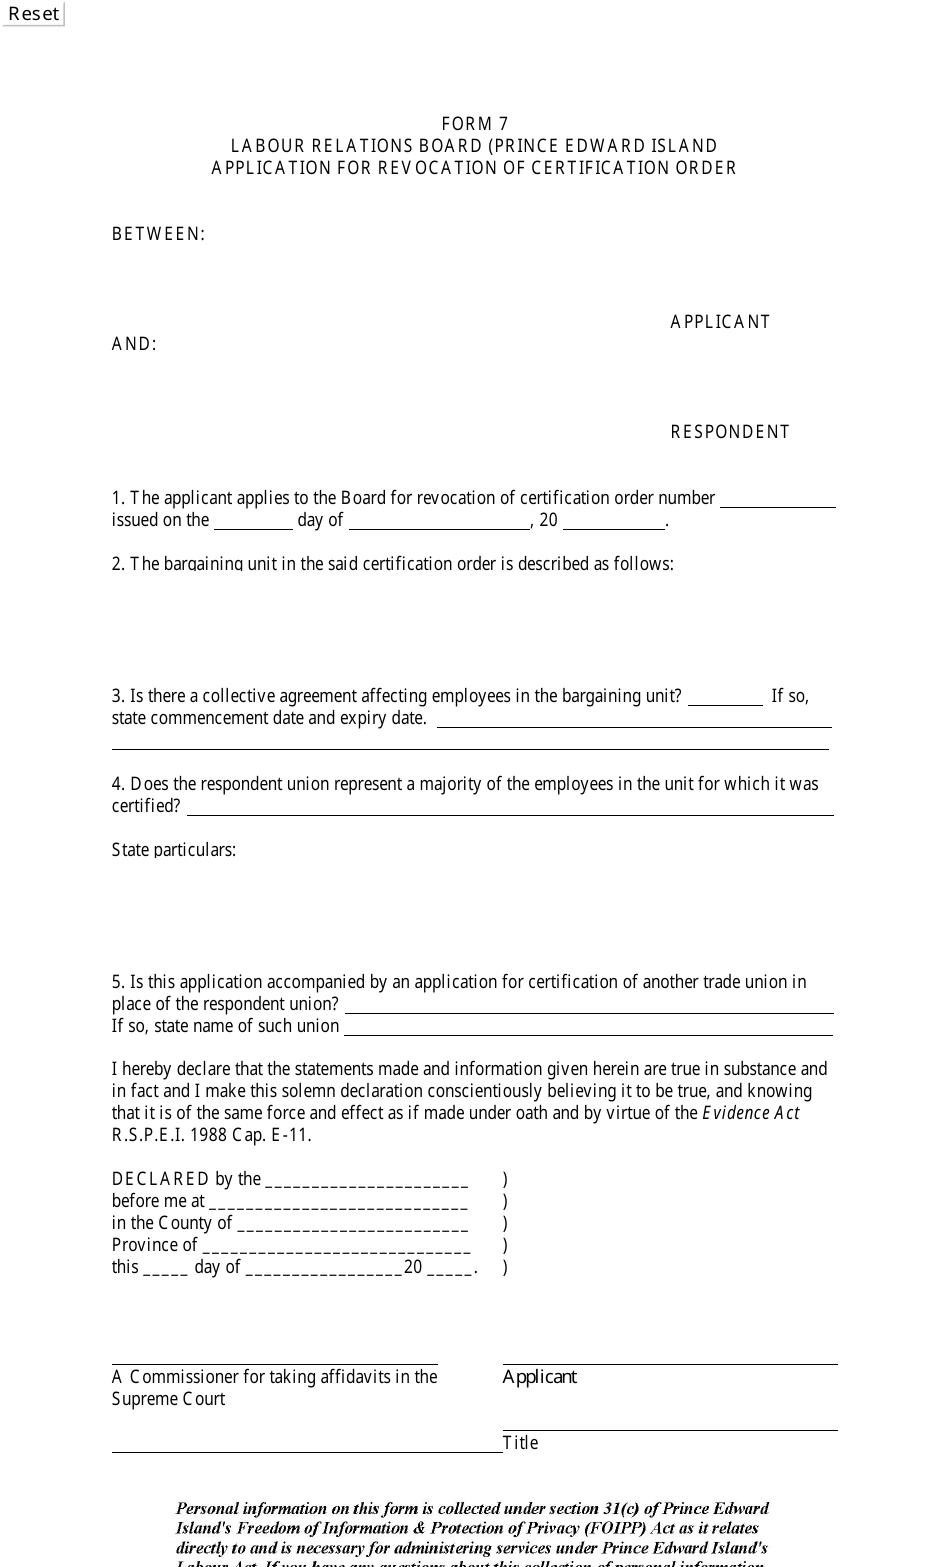 Form 7 Application for Revocation of Certification Order - Prince Edward Island, Canada, Page 1